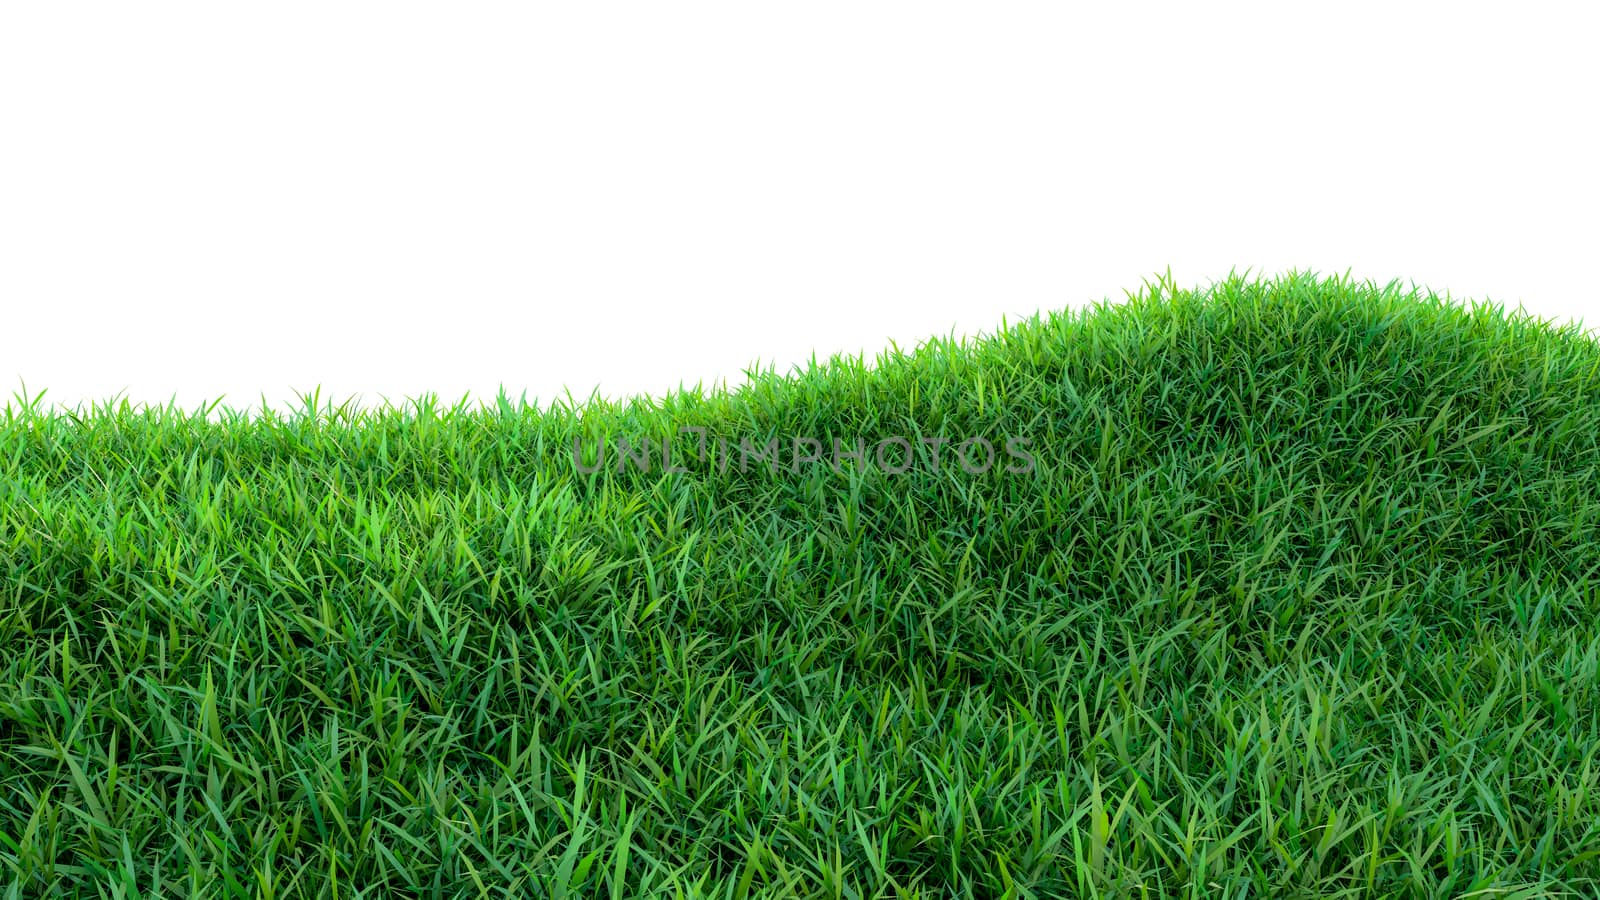 Grass background, fresh green fields, isolated on white background. 3d illustration